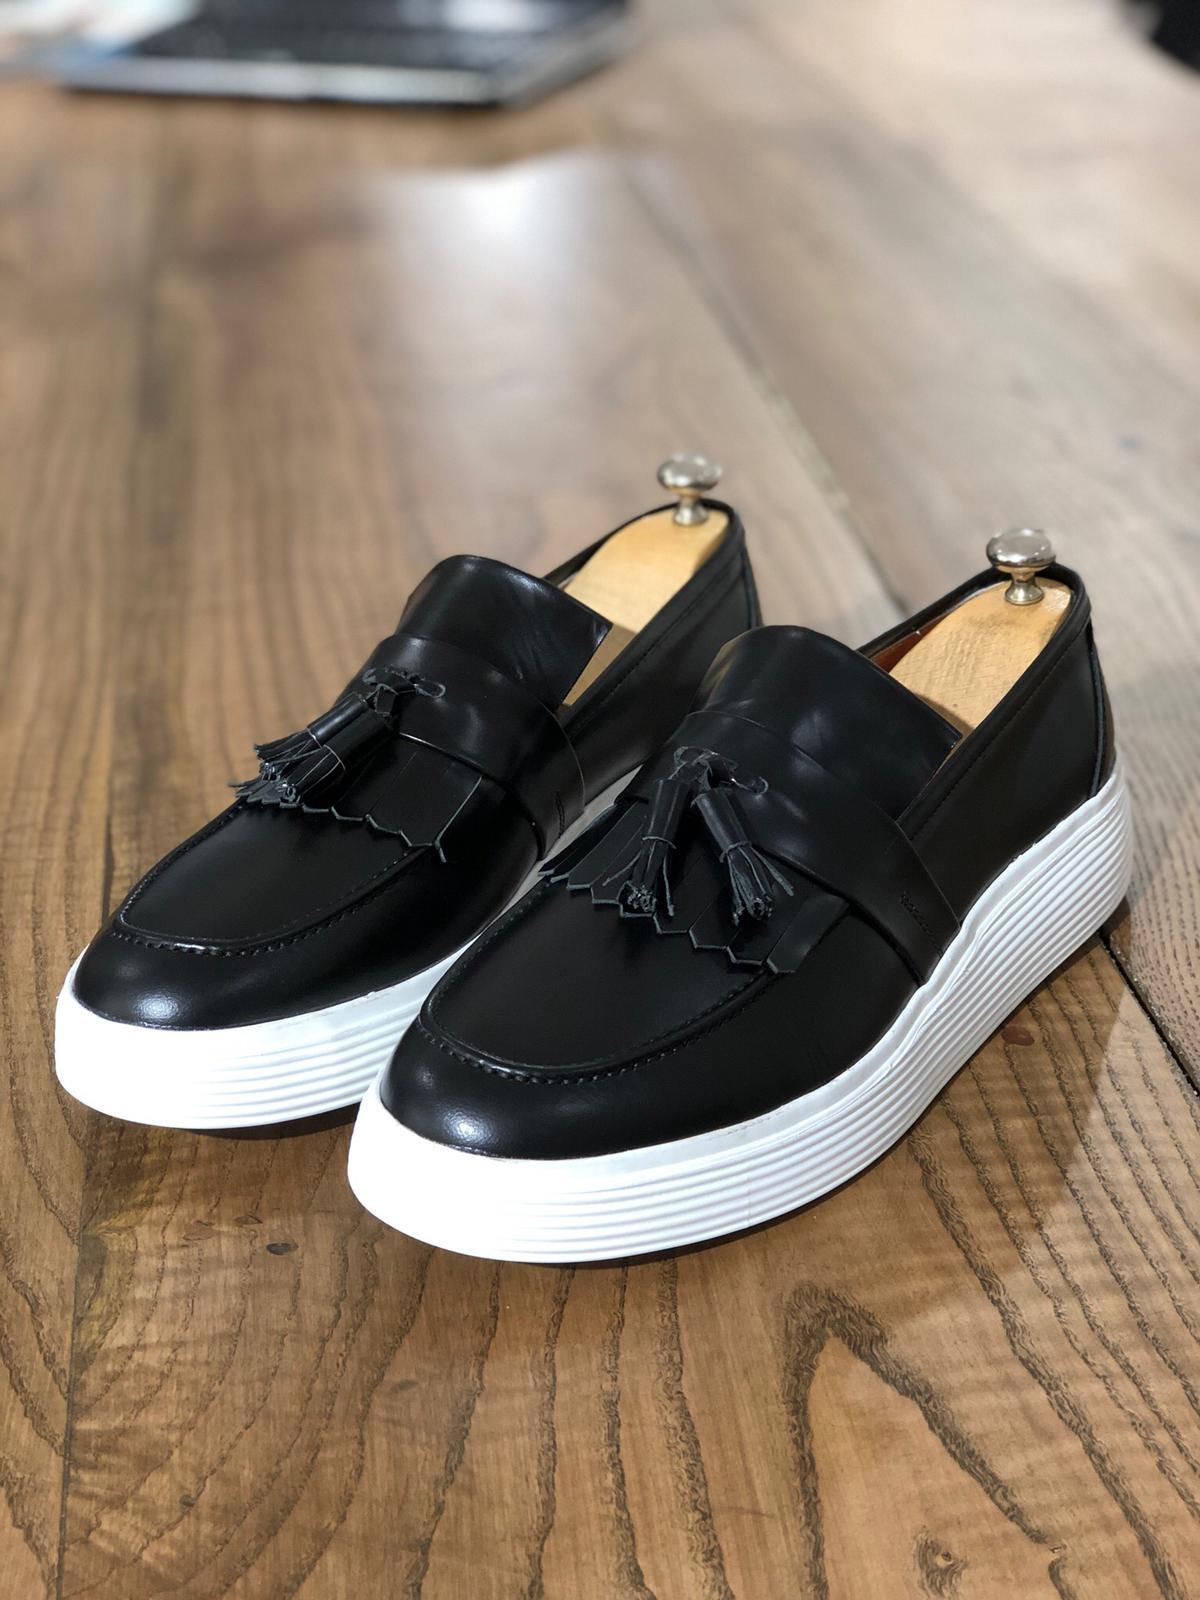 Calf-Leather Shoes in Black (Limited Edition)